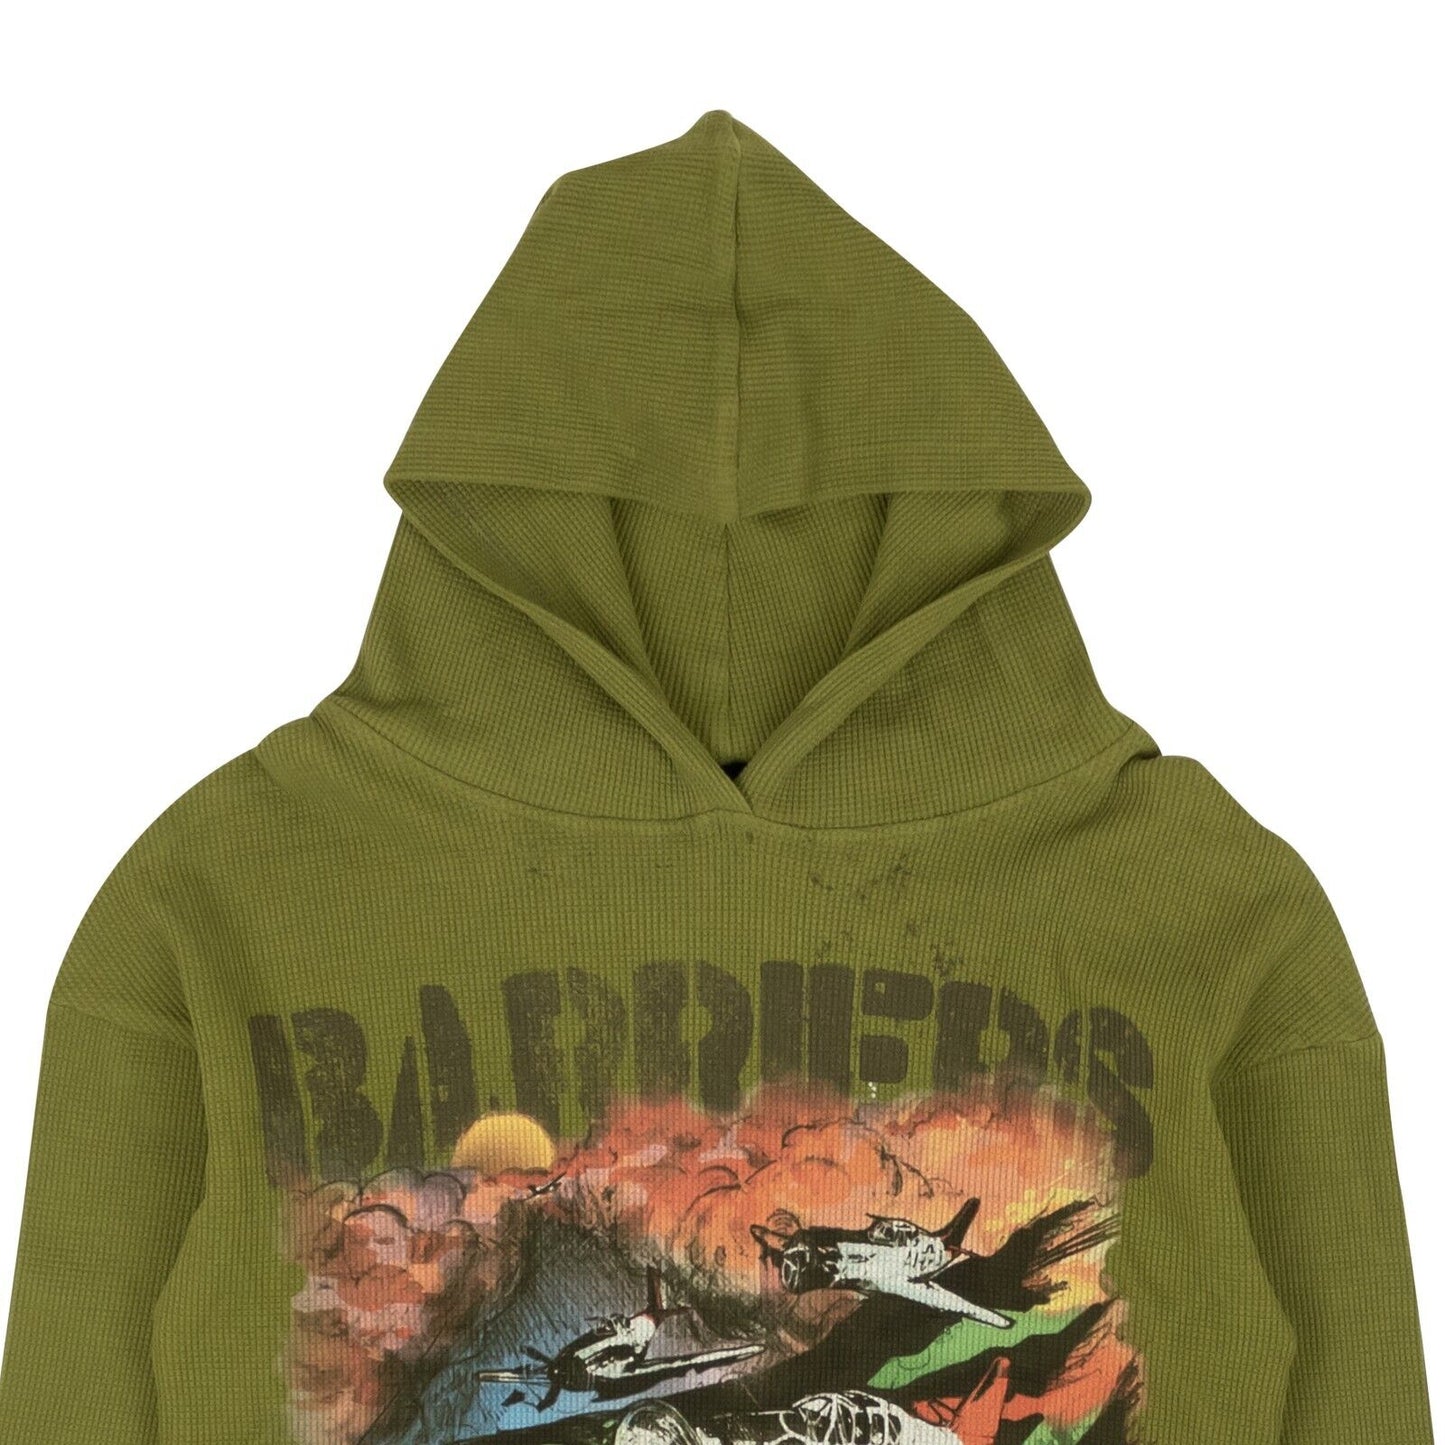 Who Decides War X Barriers Ny Tuskegee Pullover - Olive